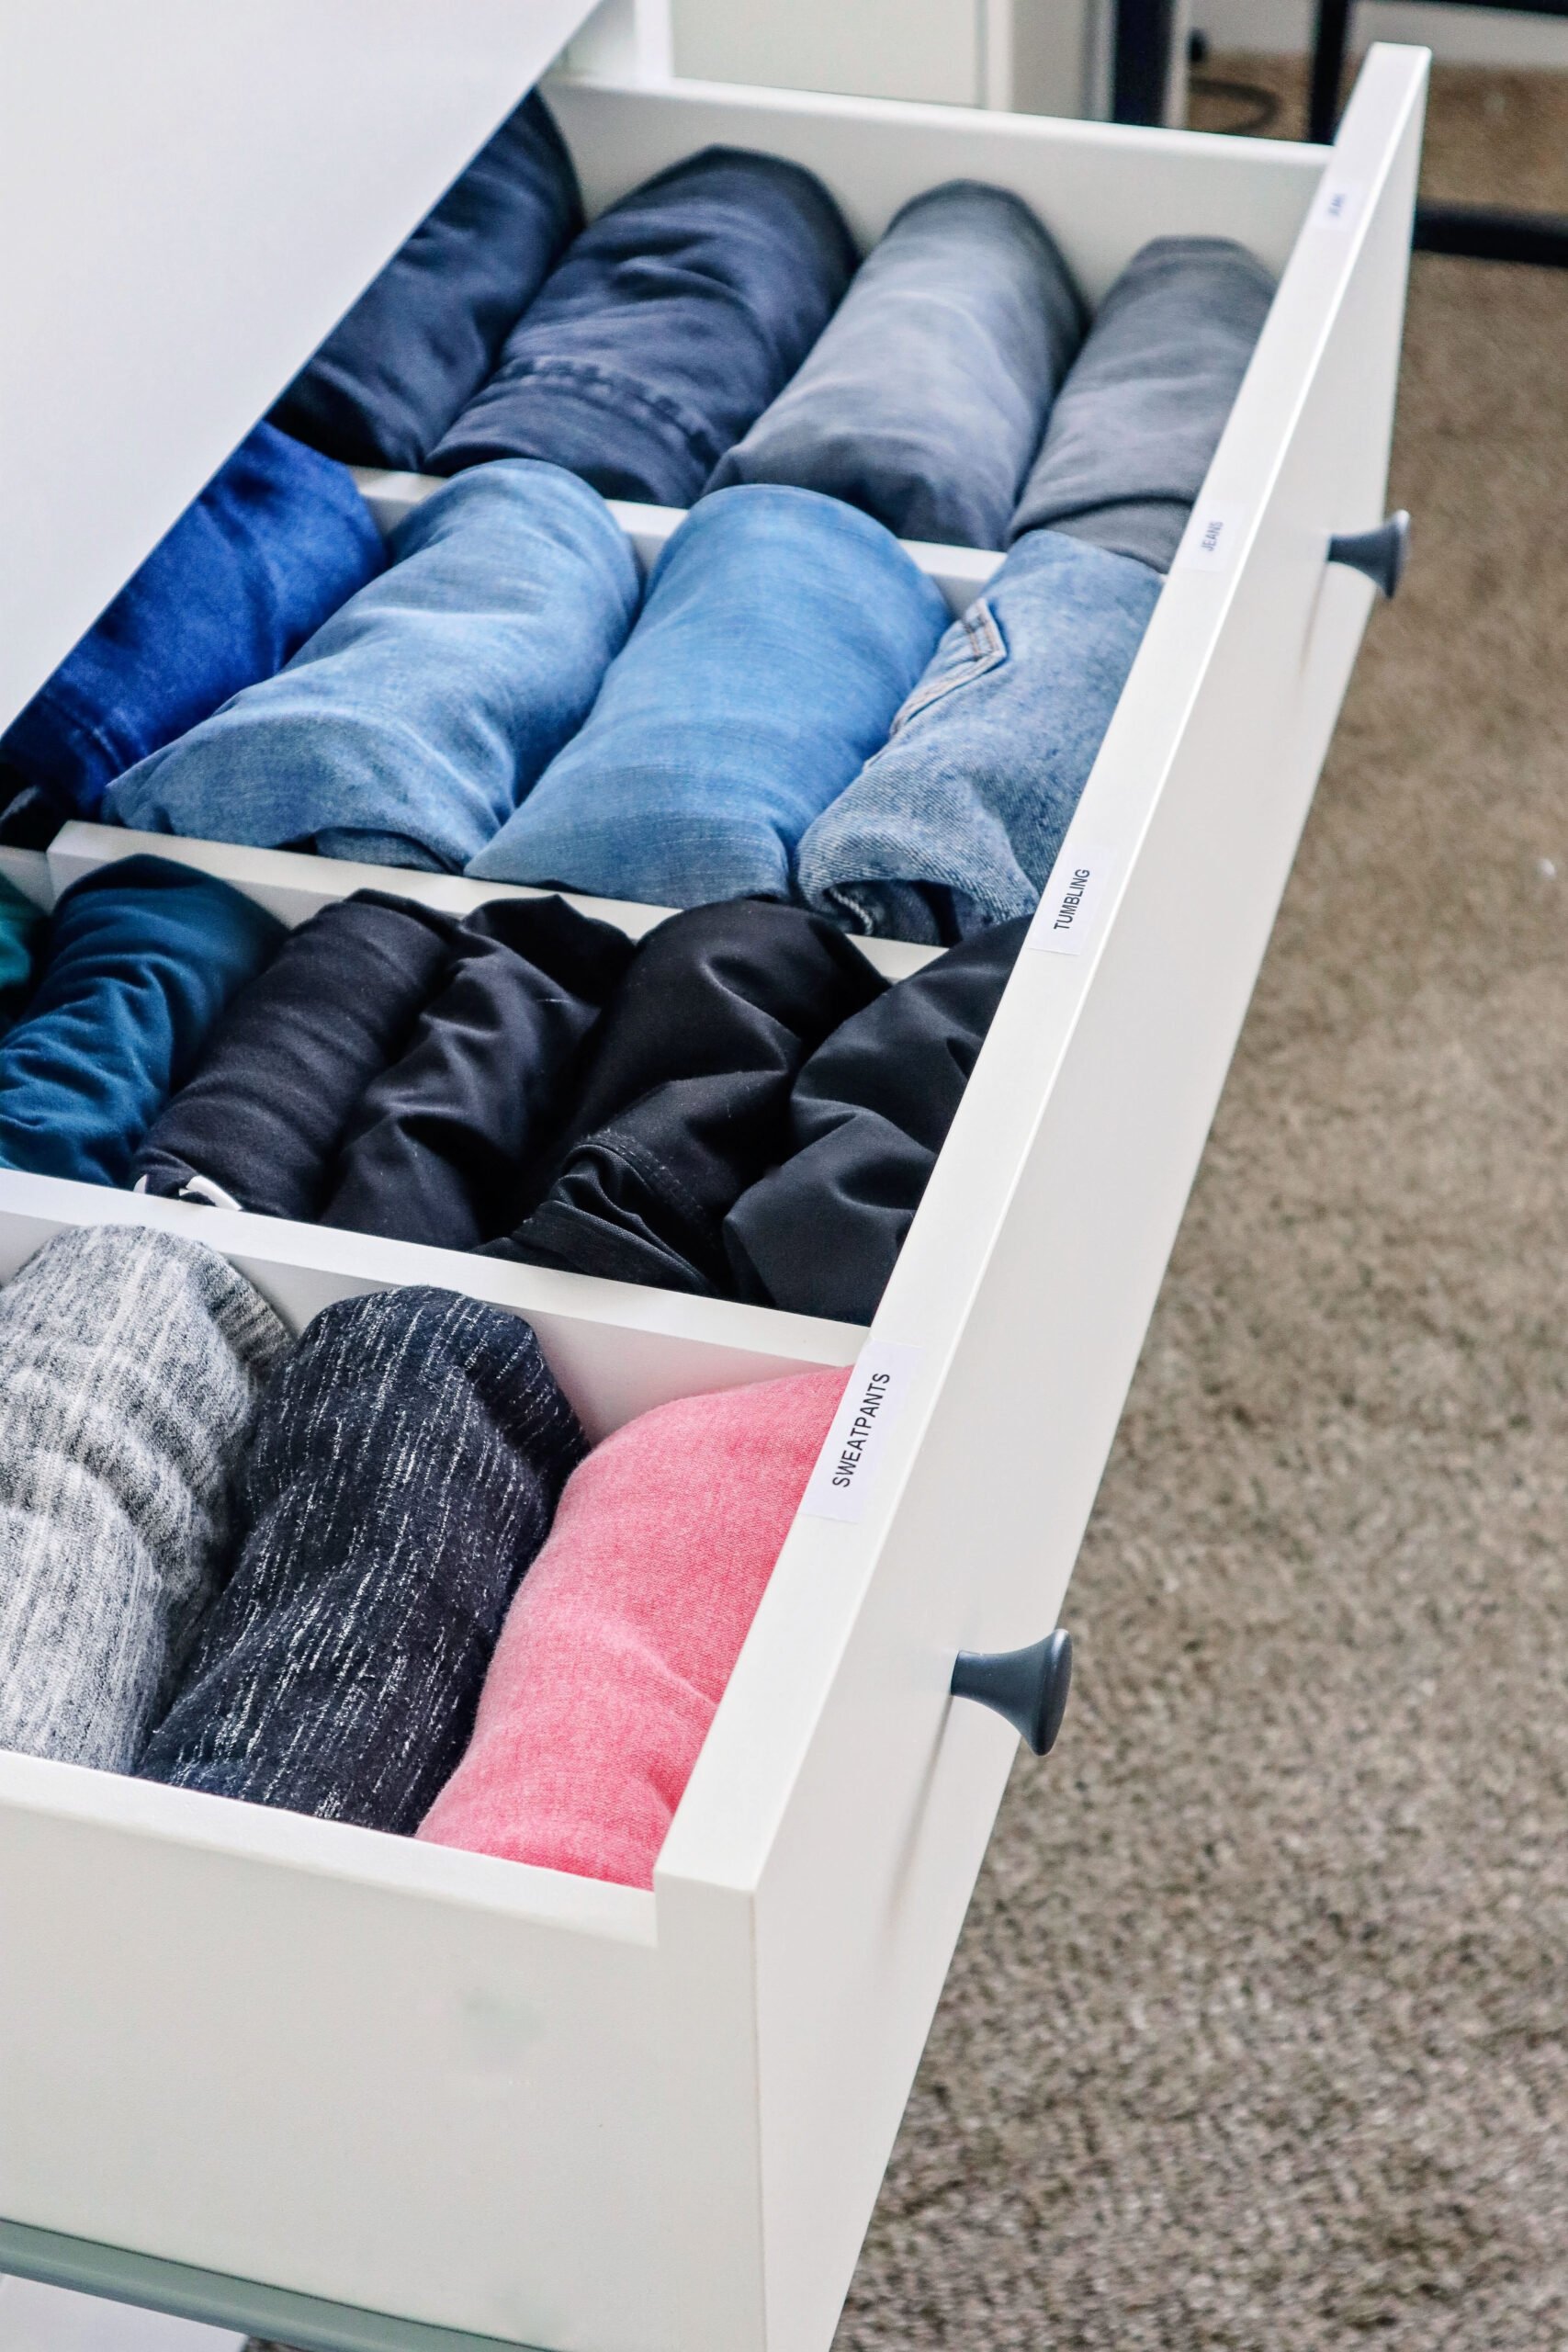 How to Organize Kids Clothes: Tips for Keeping Their Closet Neat and Tidy